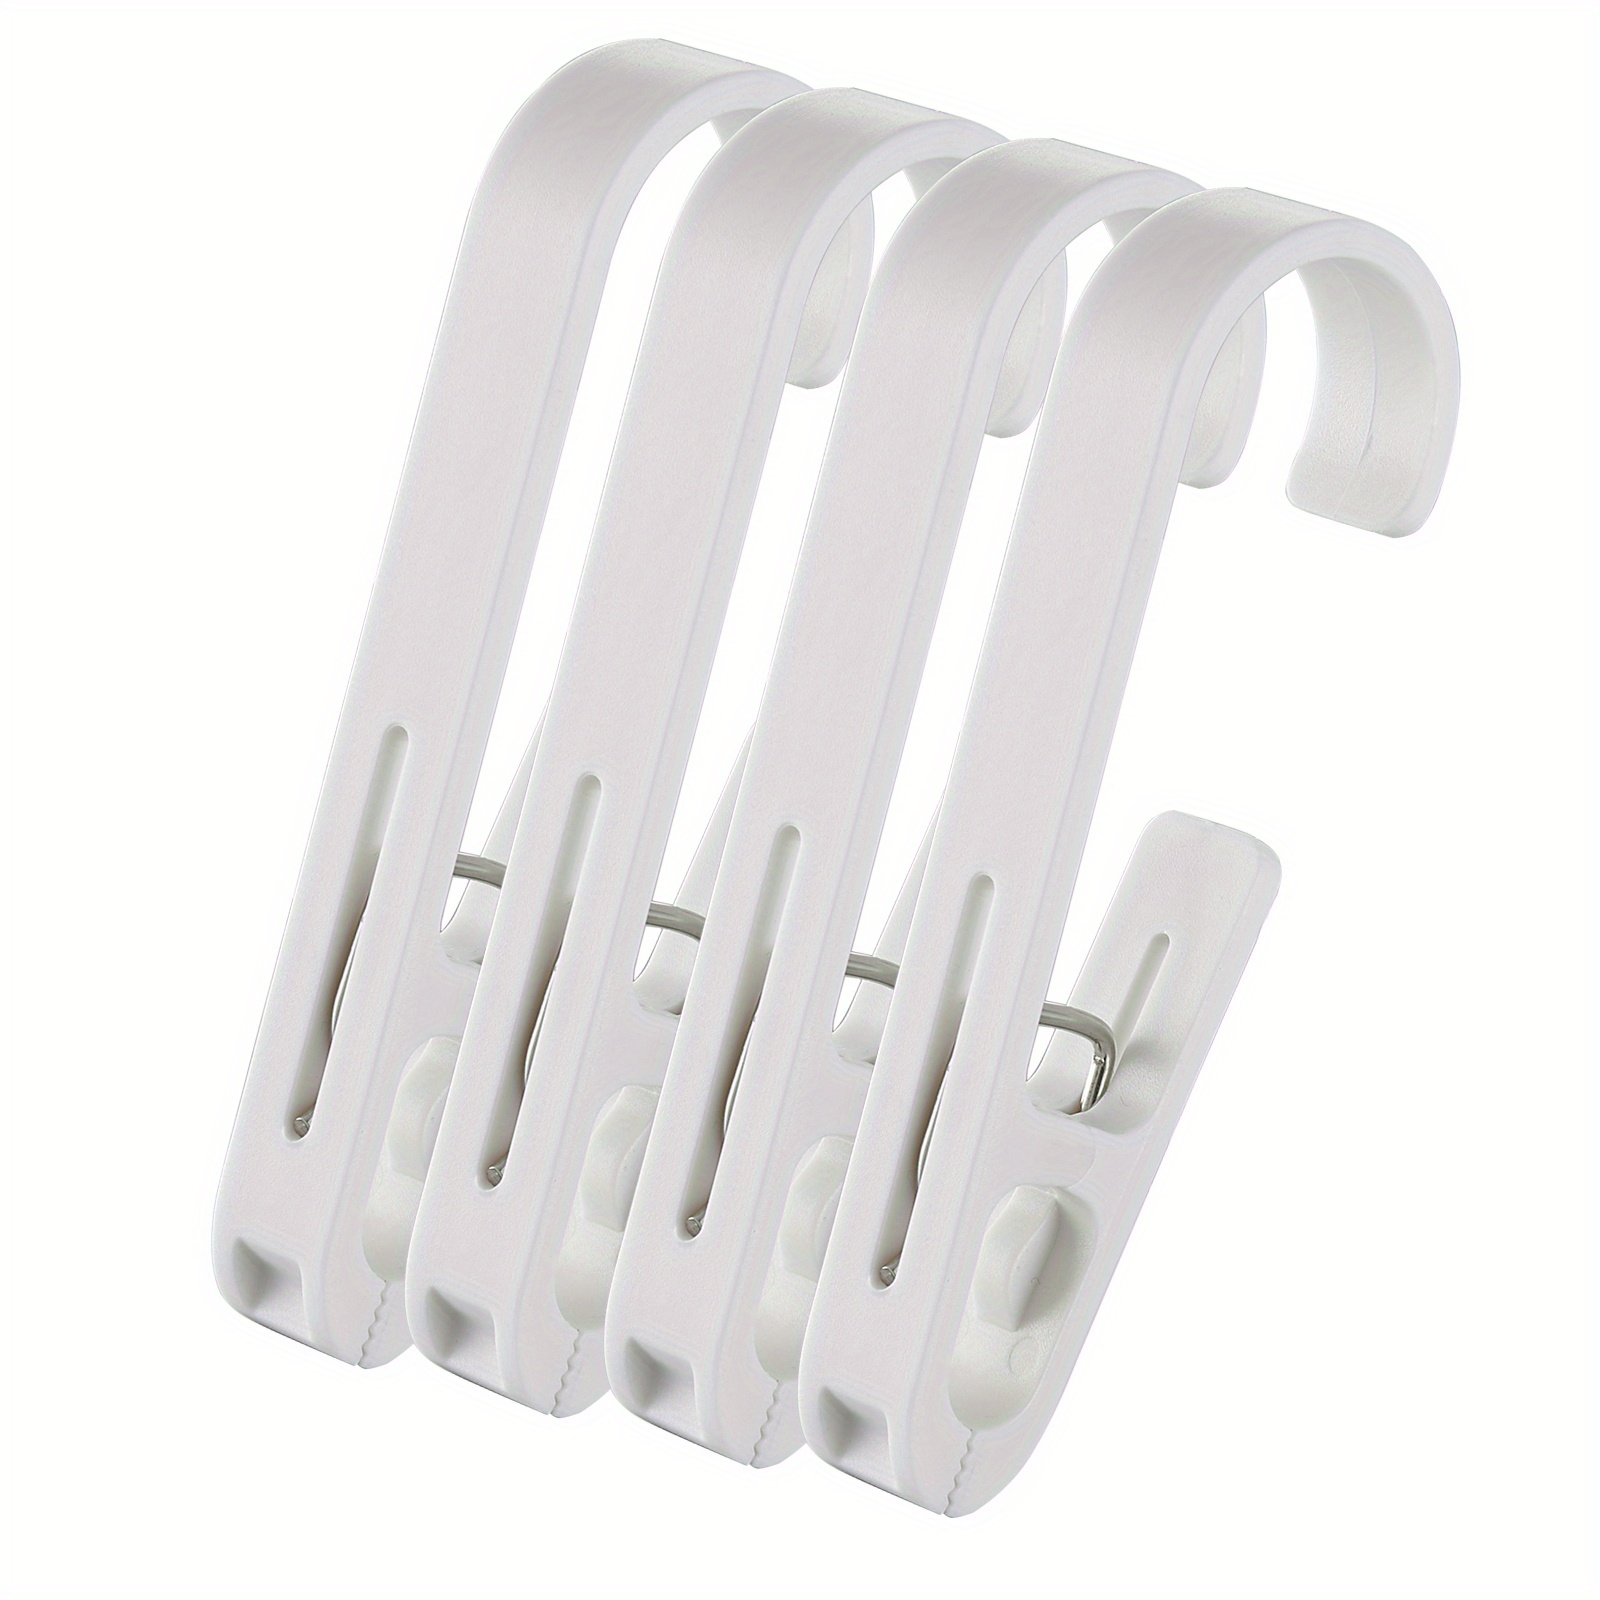 Clothes Rail Hooks Hooks Clips Windproof Pegs Large Clamp For Clothes Beach  Towel Home Drying Racks Folding Dryer Hanger 20220930 E3 Drop Dhr6G From  Bdesybag, $3.86